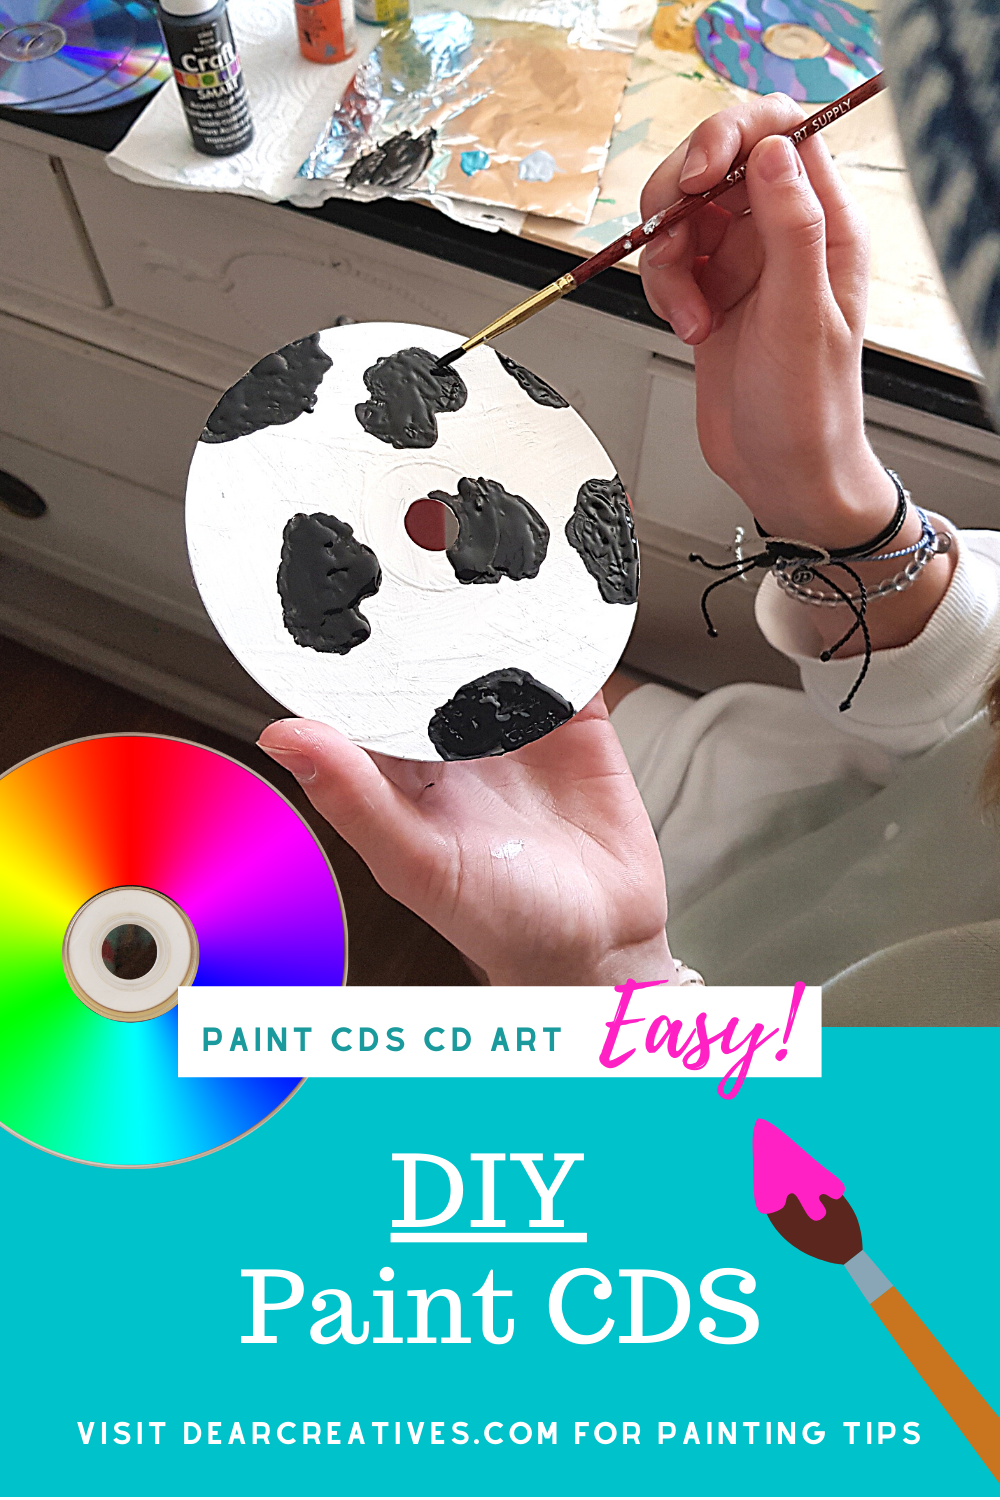 Paint CDs – Tips, Ideas, And How To!